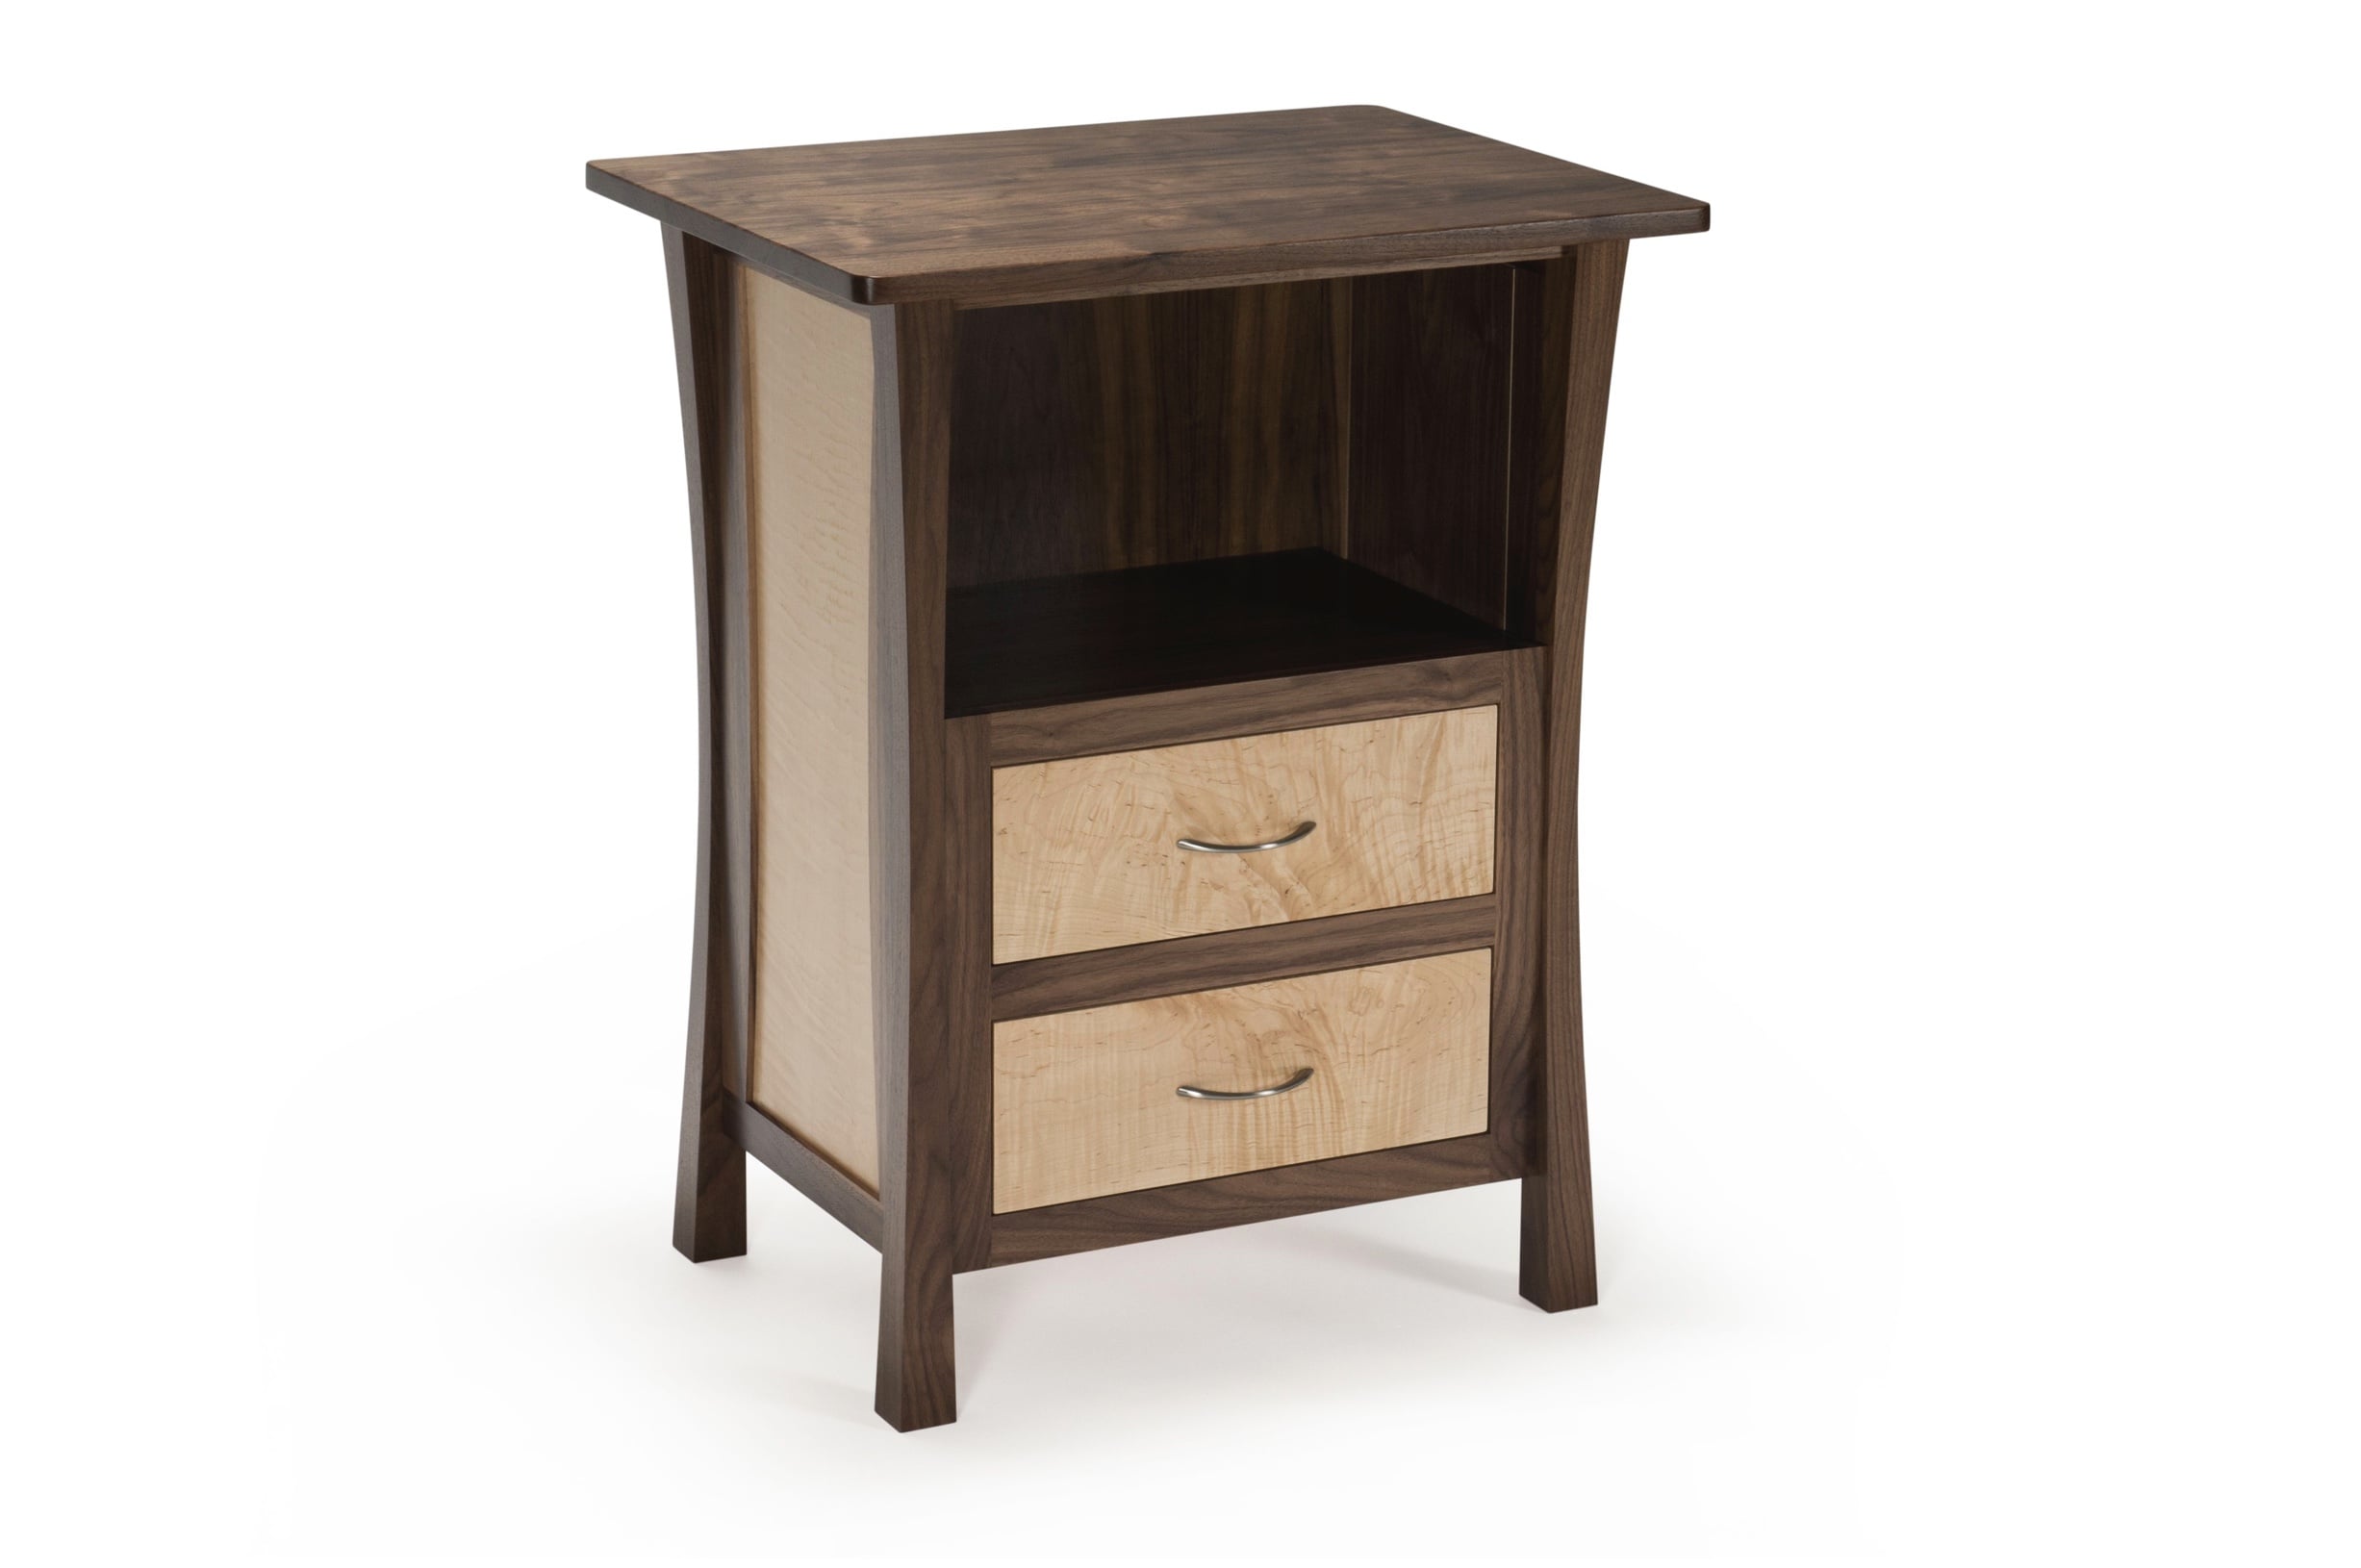 Made to Order Bedside Cabinets. - BSC 059-01